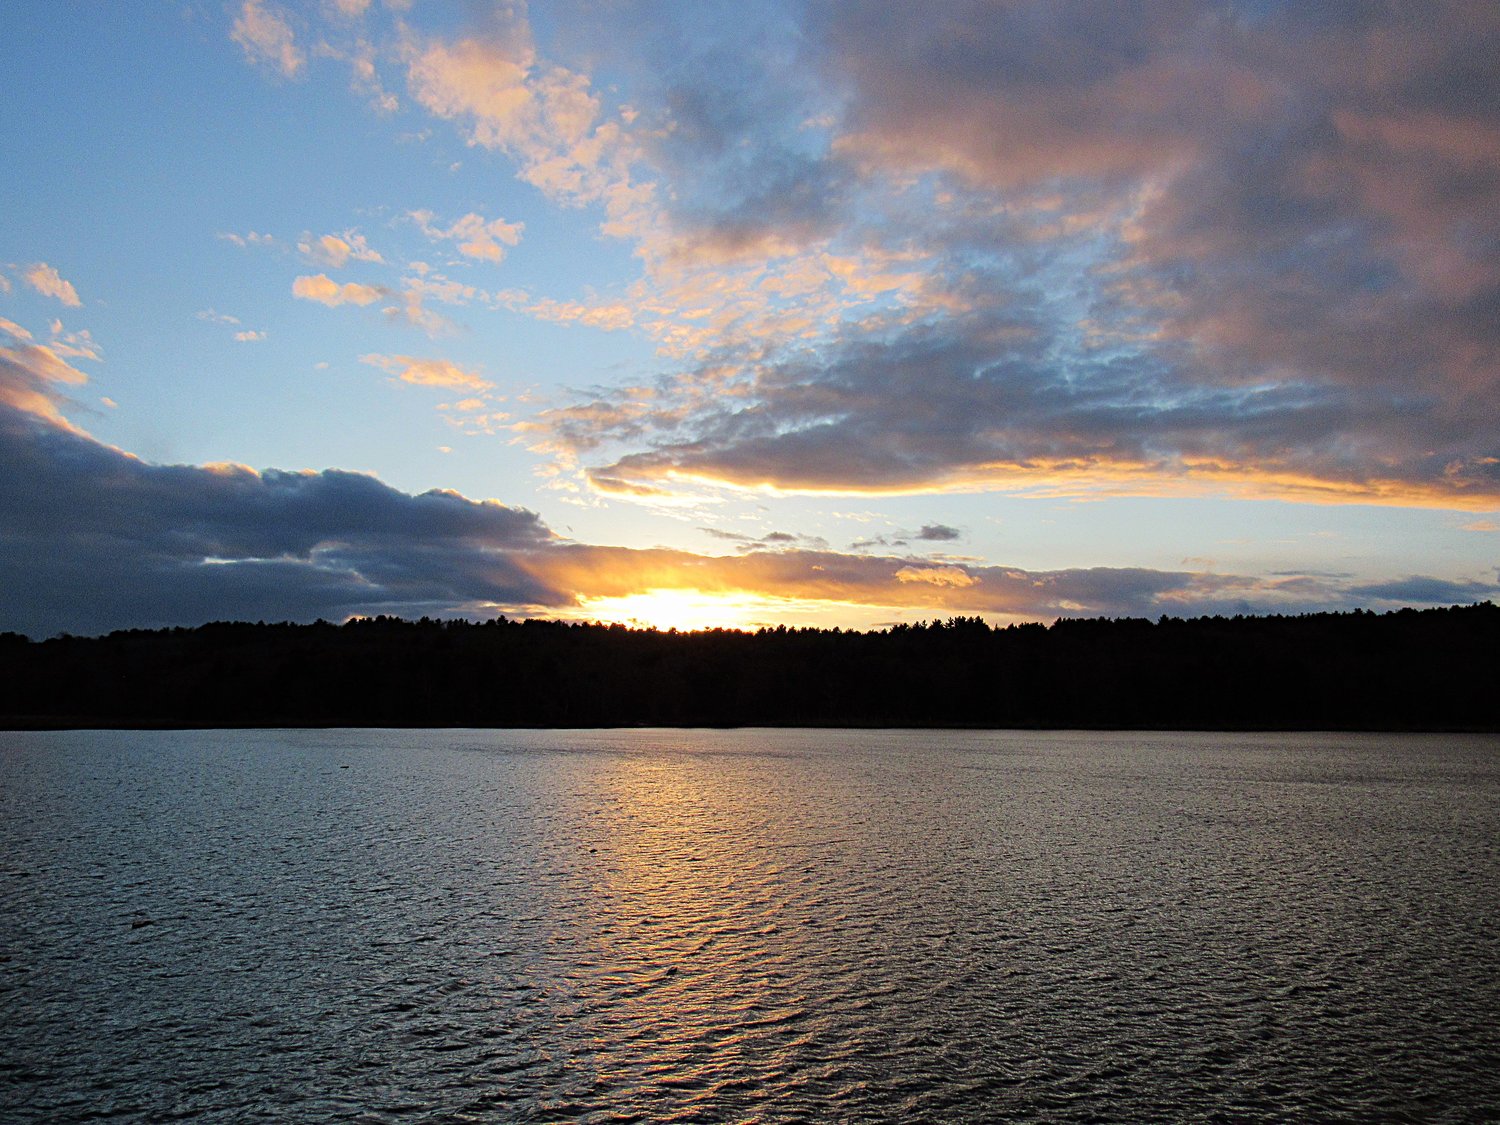 "Cerulean Sunset Over Sawkill Pond" by Vito DiBiasi.